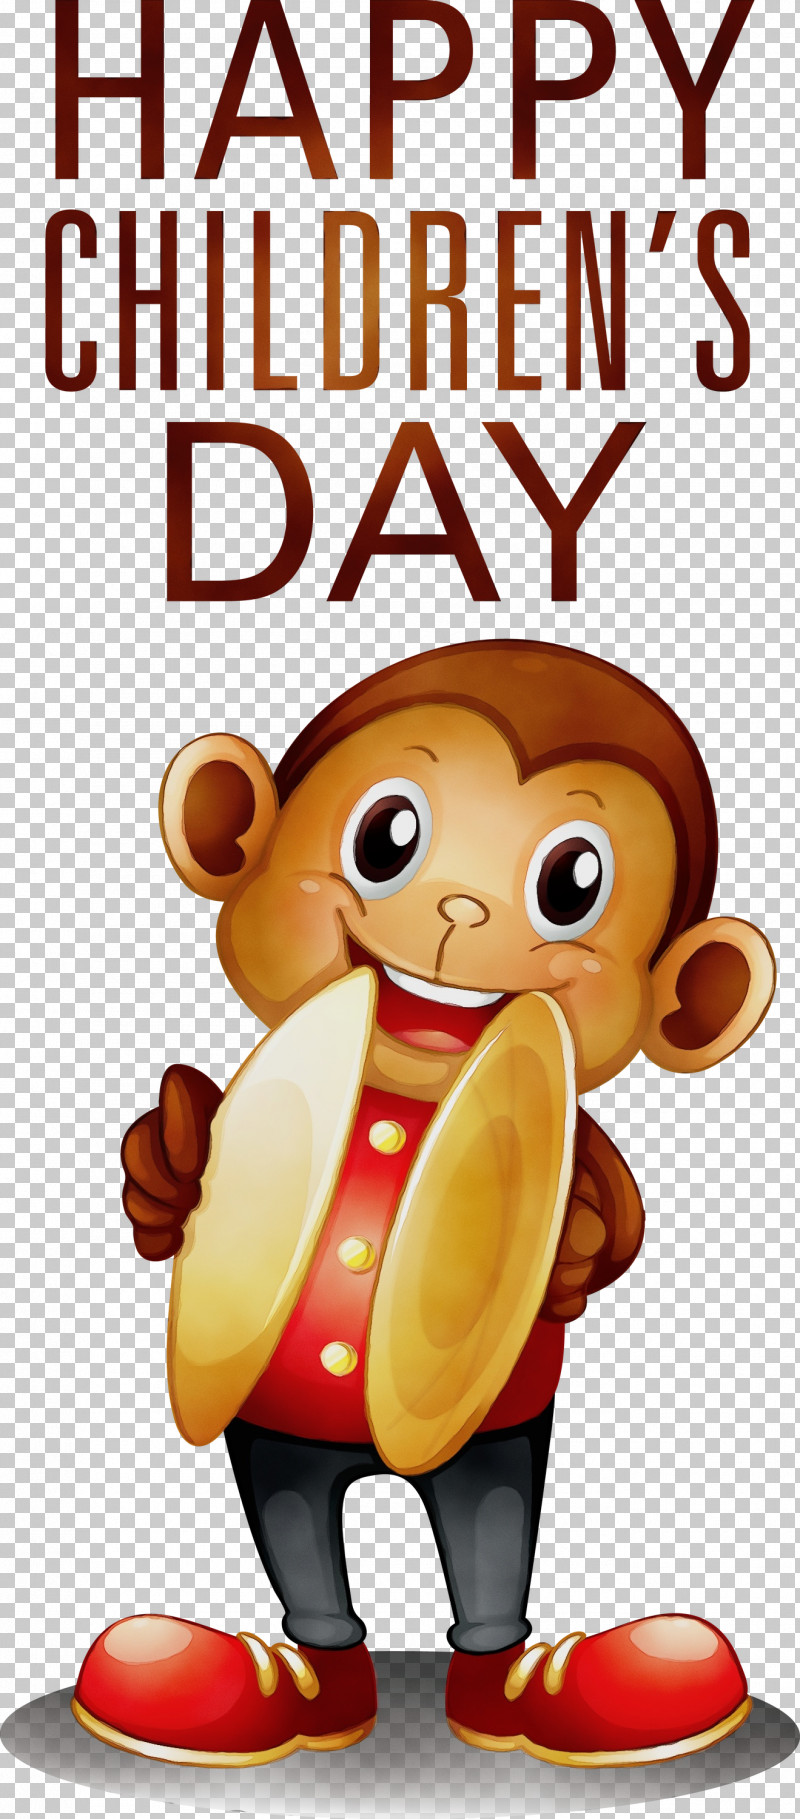 Cymbal Cymbal-banging Monkey Toy Drawing Cartoon Percussion PNG, Clipart, Cartoon, Cymbal, Cymbalbanging Monkey Toy, Drawing, Happy Childrens Day Free PNG Download